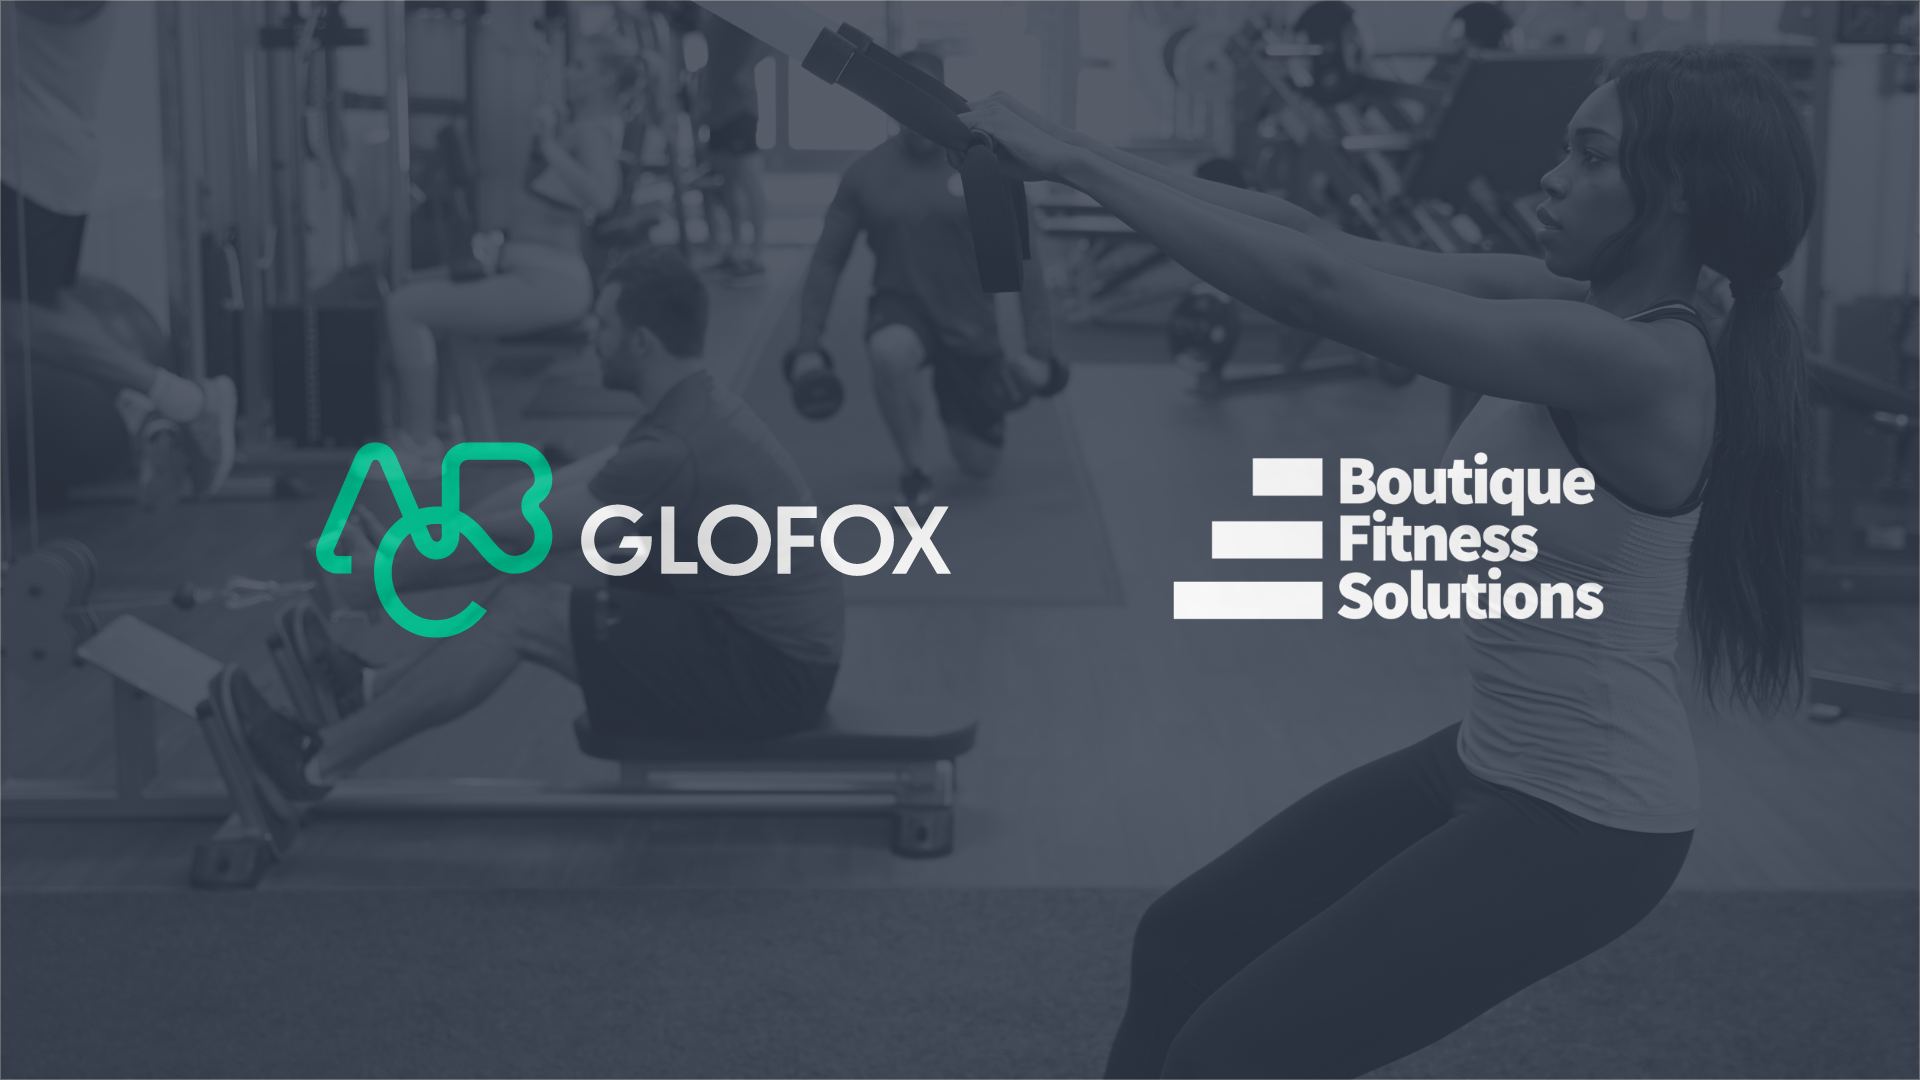 12 Types of People at The Gym and How to Engage Them - Boutique Fitness and  Gym Management Software - Glofox